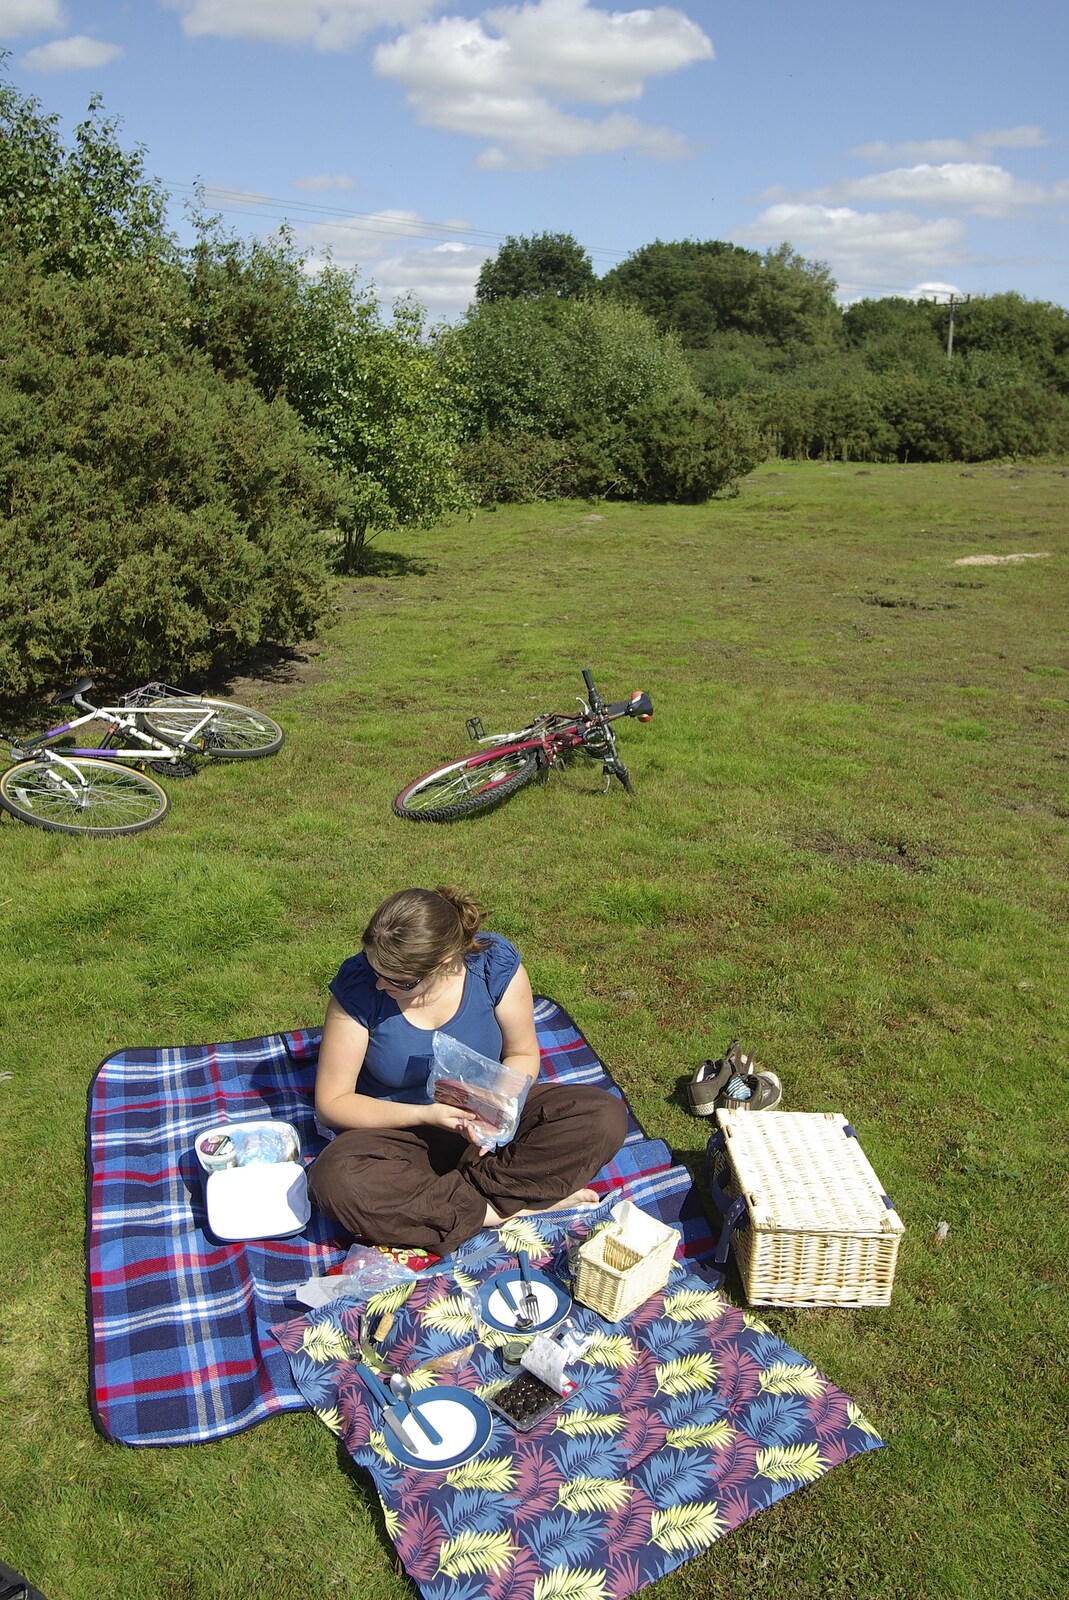 A Picnic on The Ling, Wortham, Suffolk - 26th August 2007: Picnic blankets and bikes